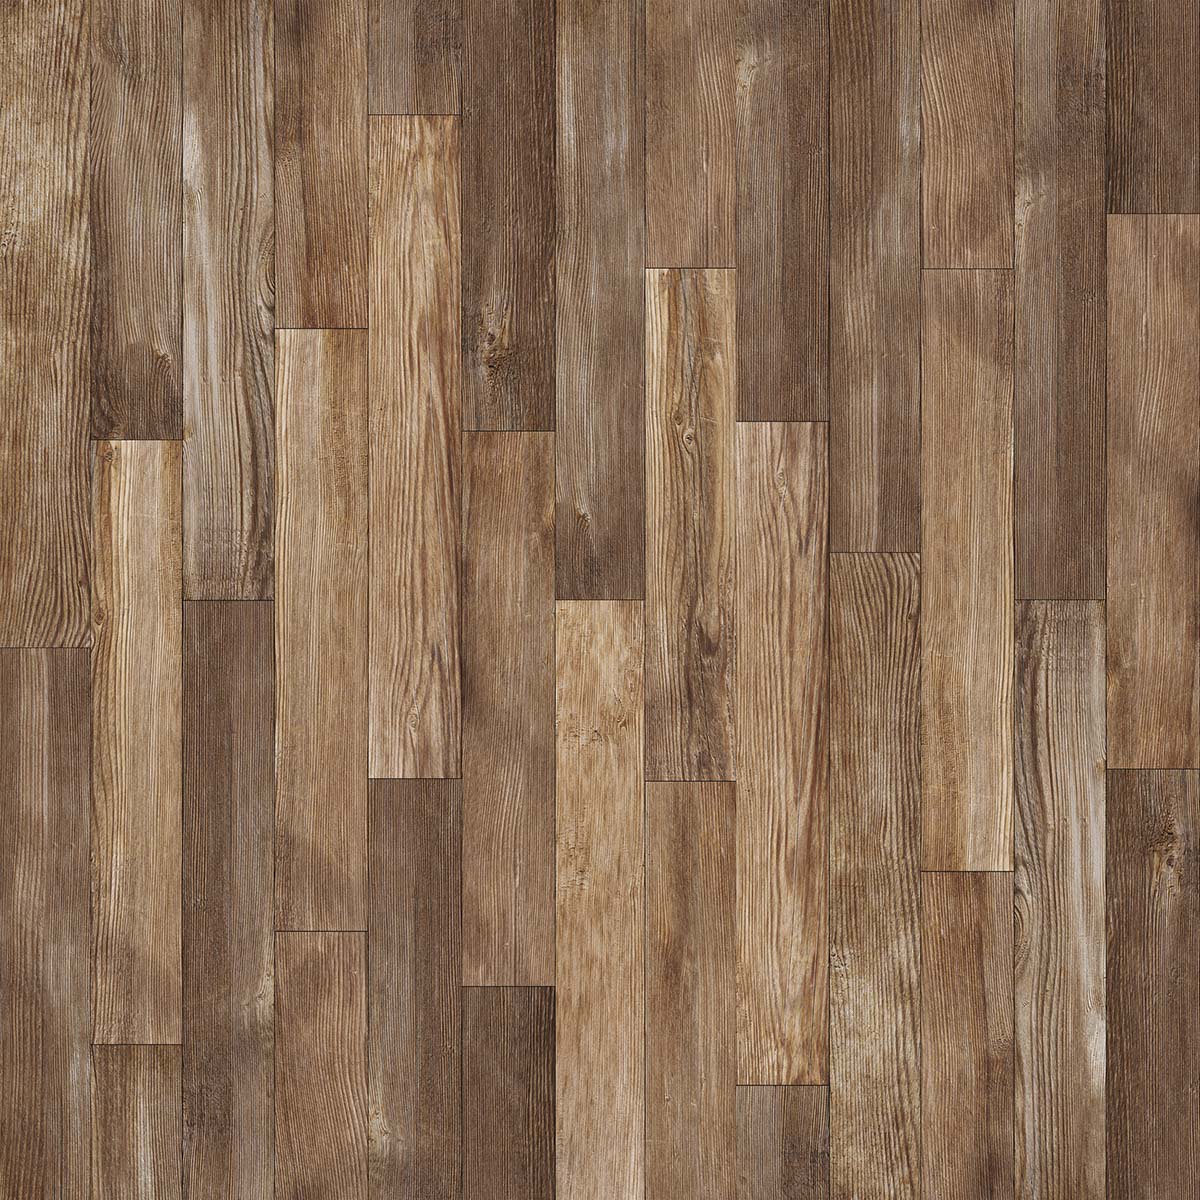 A wood floor with many rectangular planks